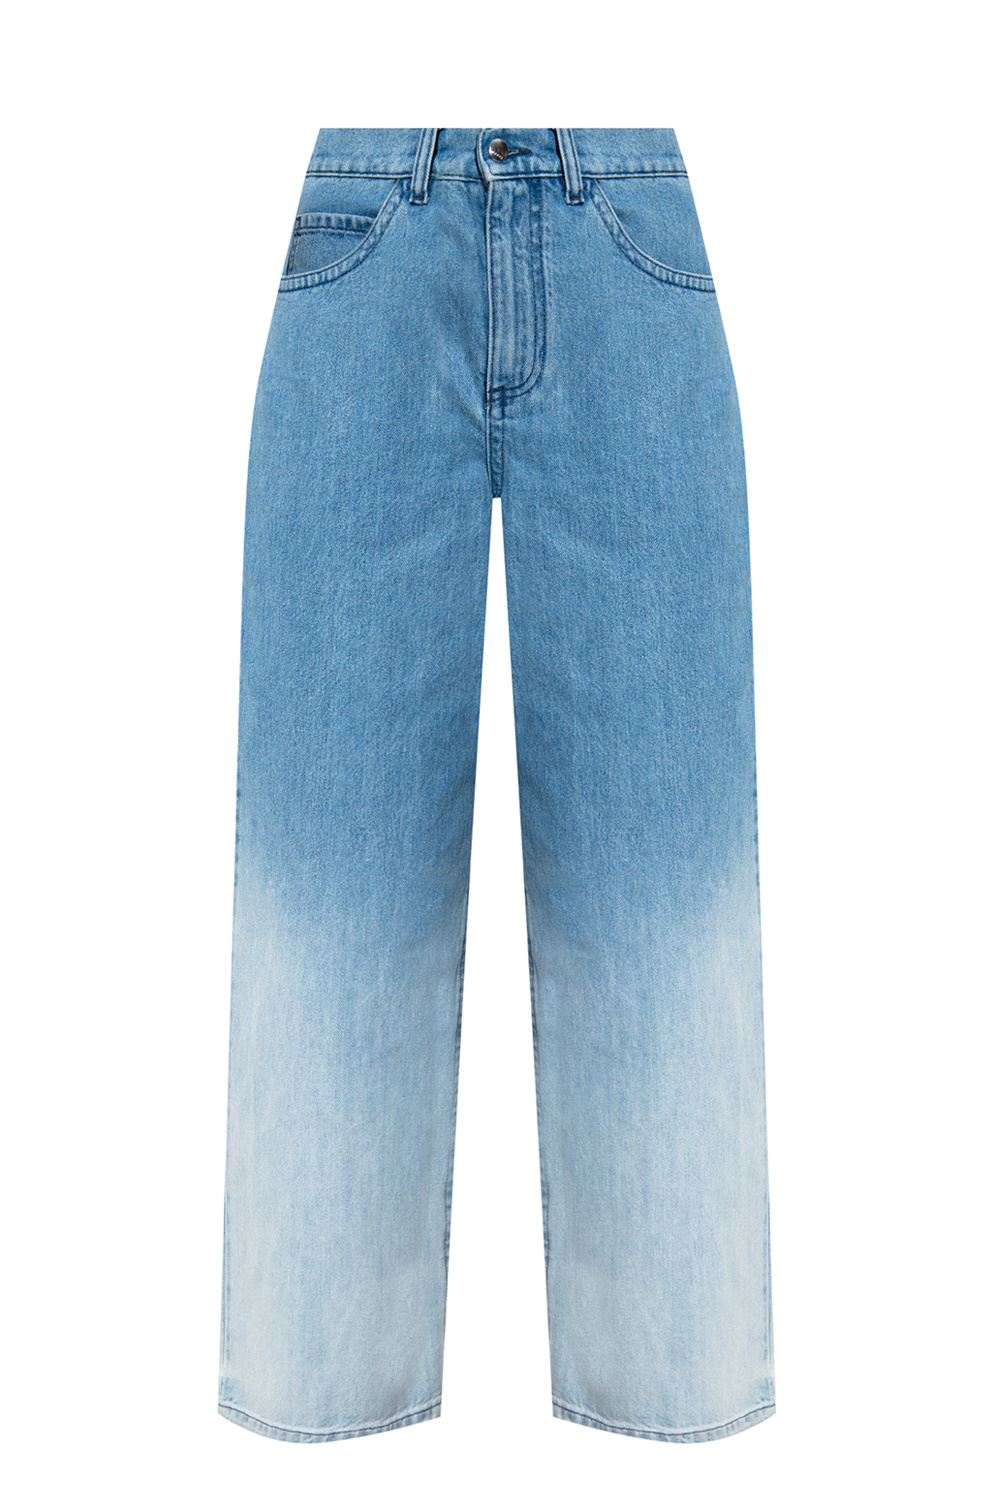 Marni Jeans with ombre effect